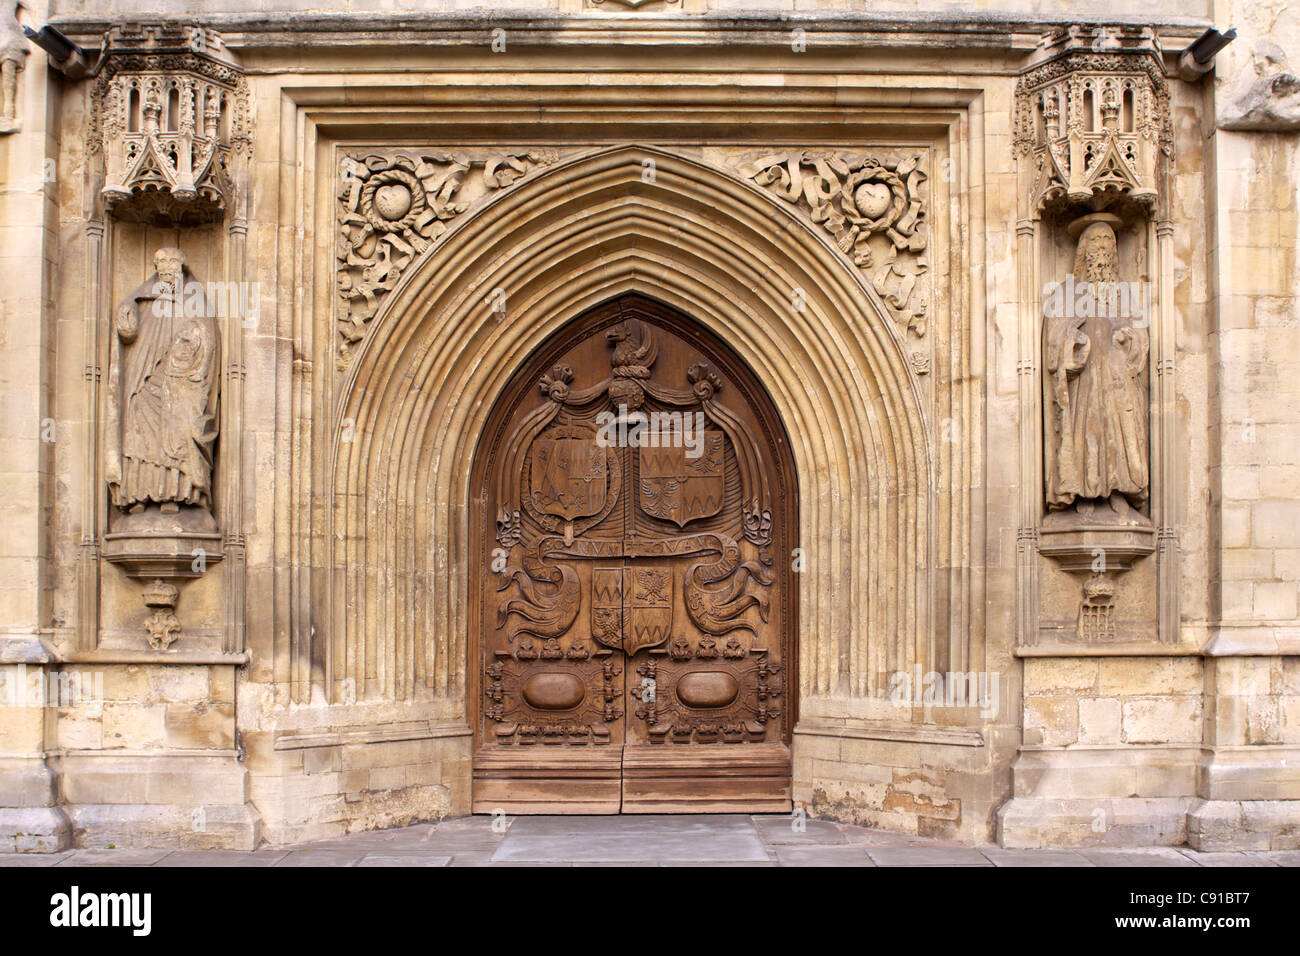 Wooden door and entrance to the Abbey Church of Saint Peter and Saint Paul, commonly known as Bath Abbey. Stock Photo